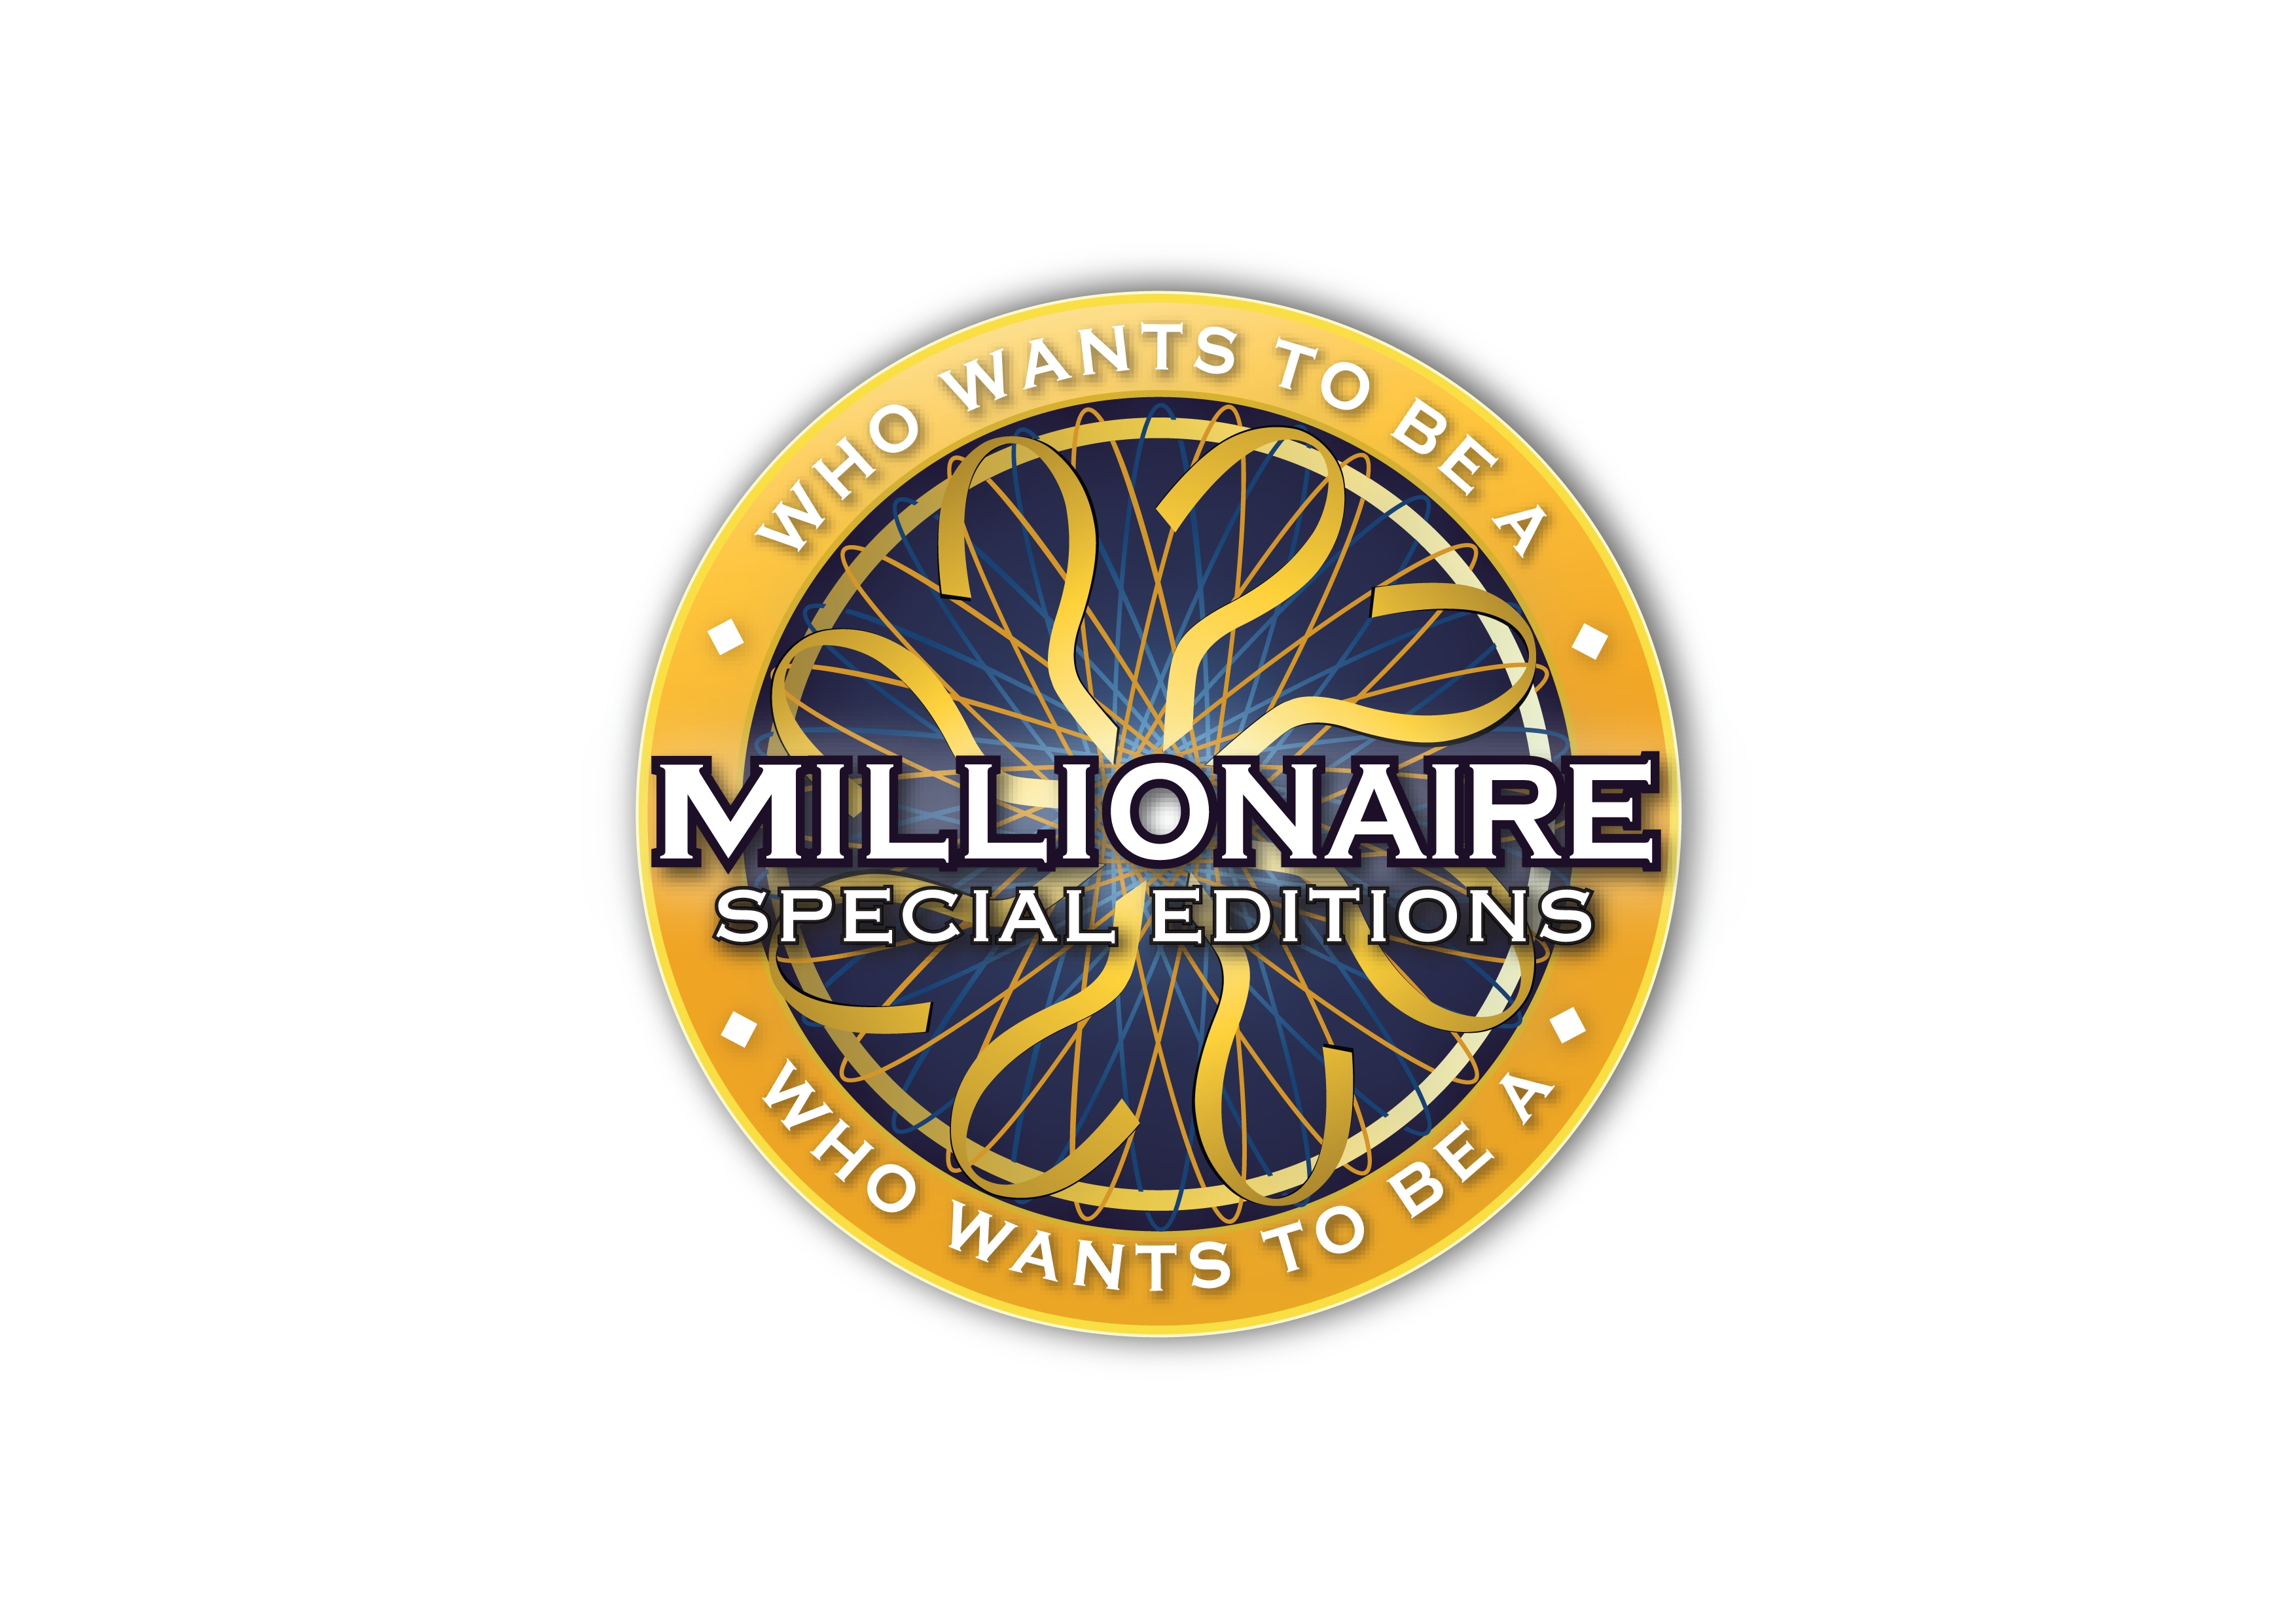 Who Wants to Be a Millionaire' Returns to U.K.'s ITV With Play-Along Game